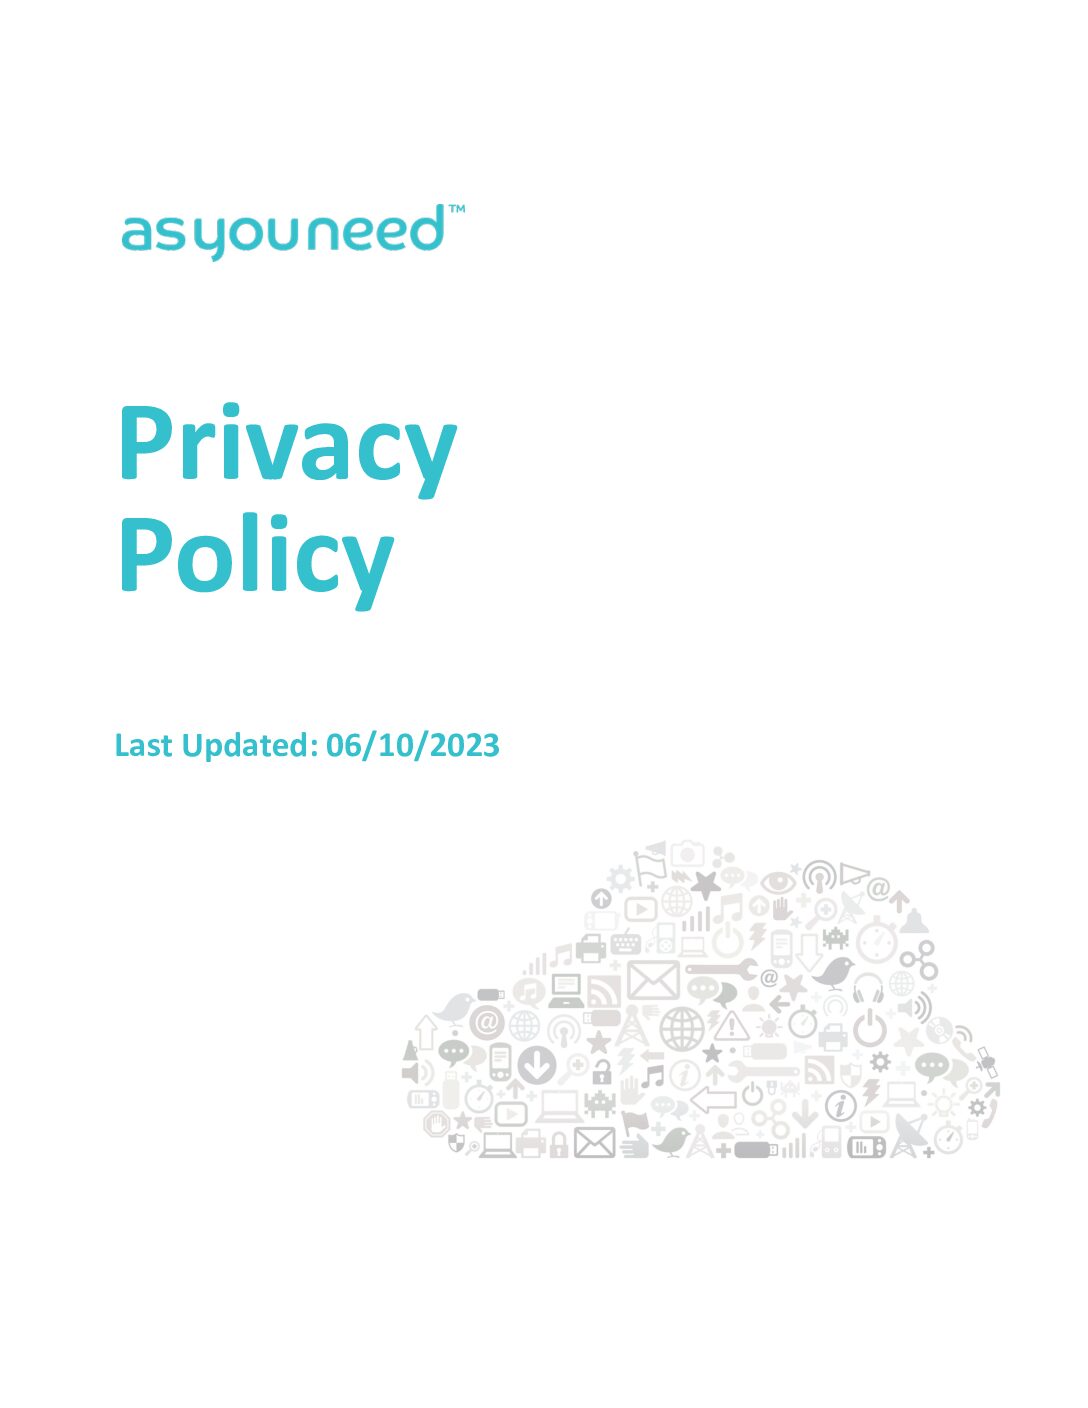 Asyouneed – Privacy Policy (PP)